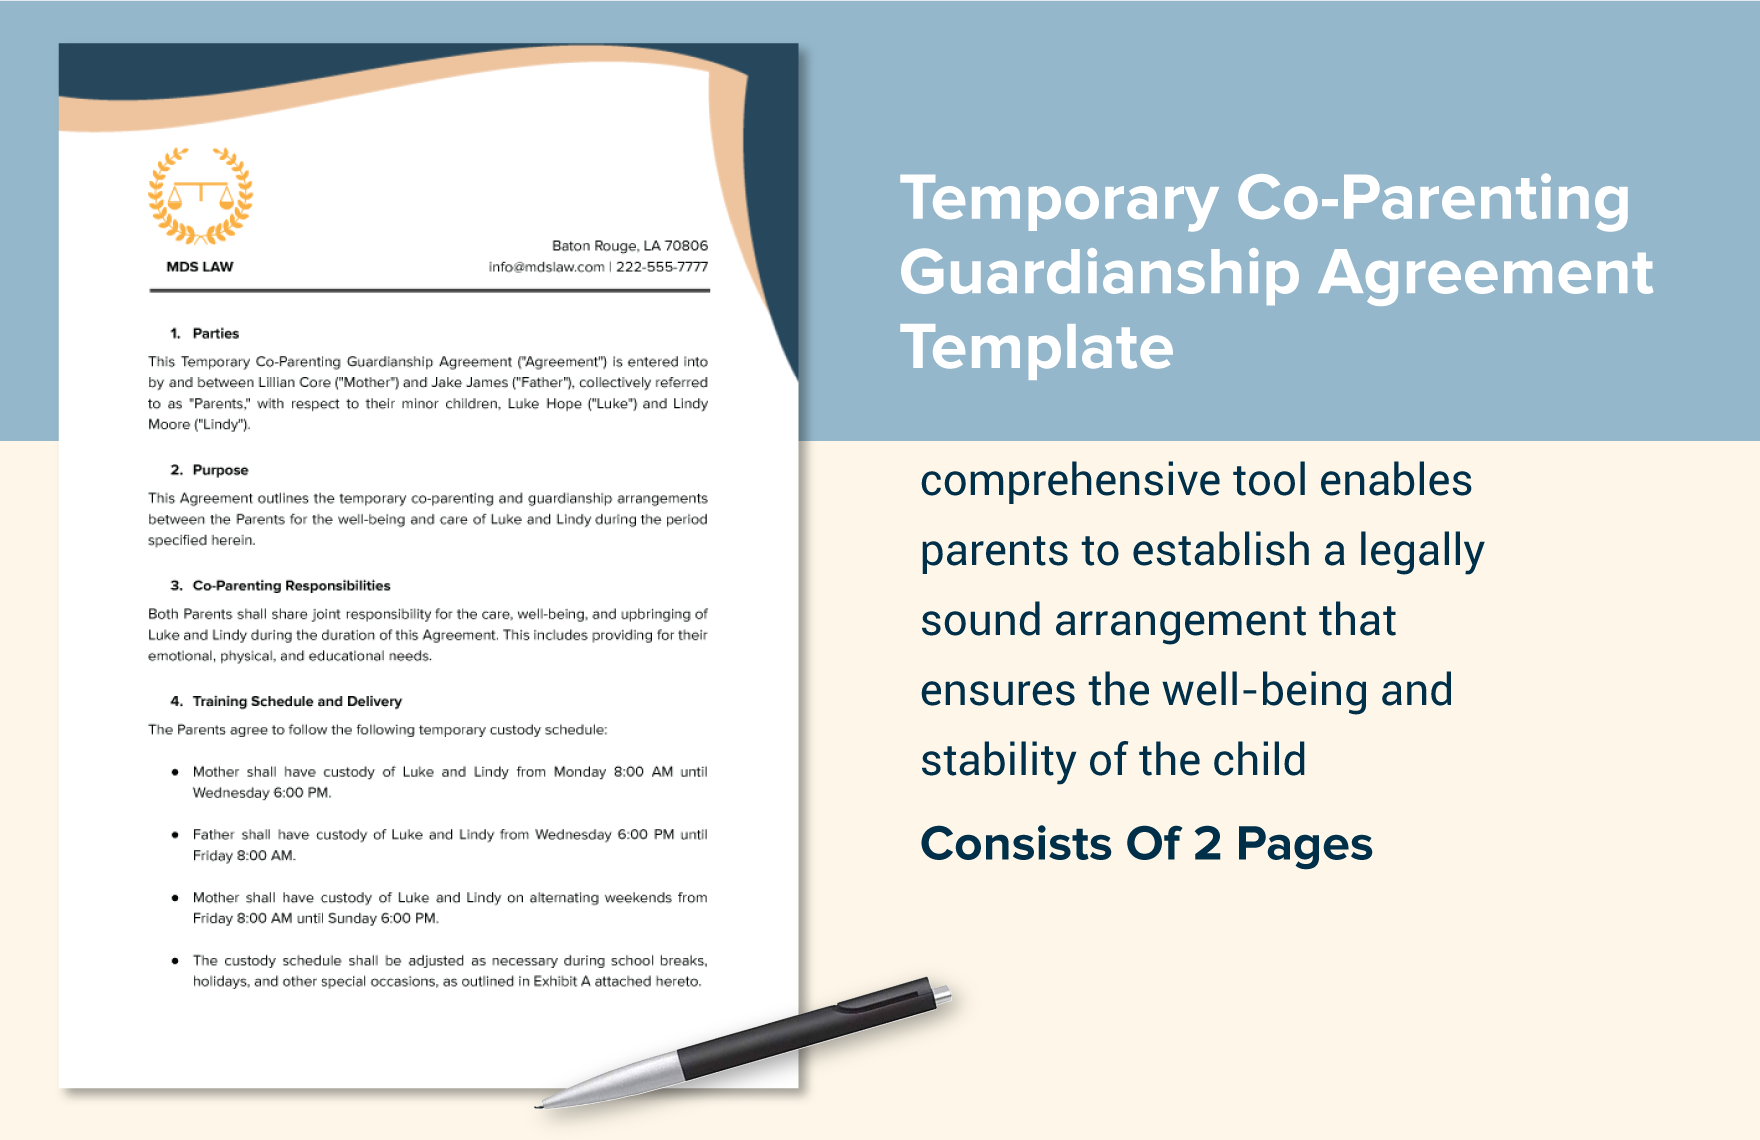 Temporary Co-Parenting Guardianship Agreement Template